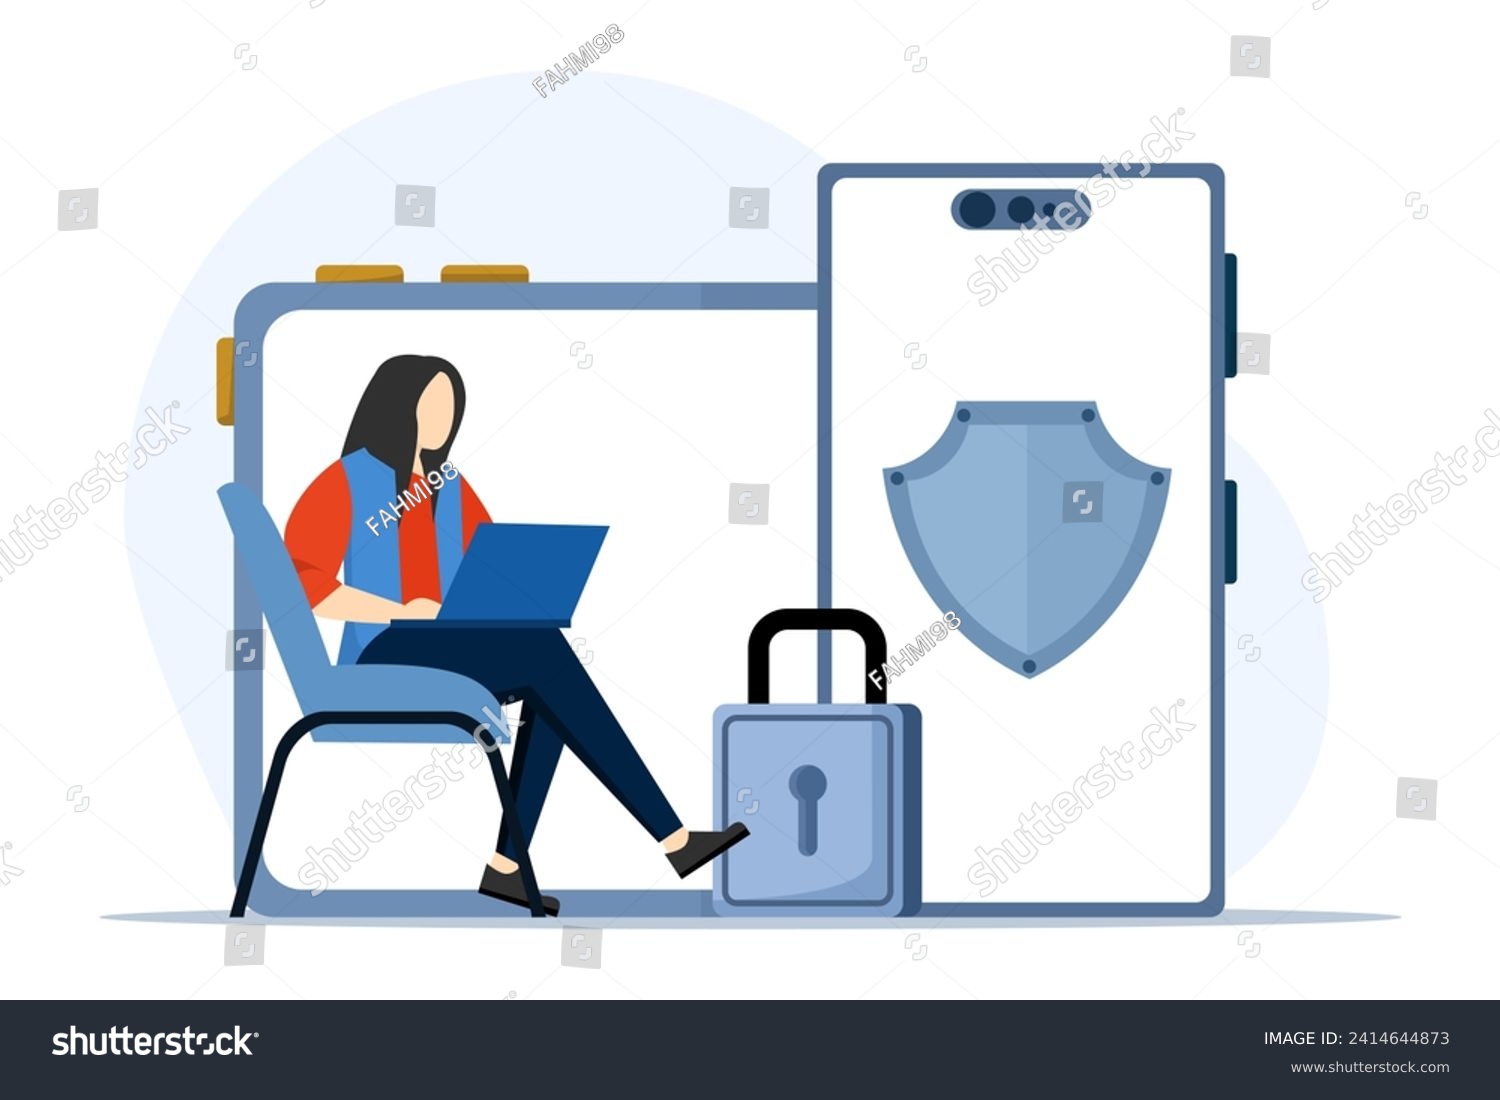 SVG of concept General data protection regulation, Control and security of personal information, browser cookie consent, GDPR disclose data collection Flat vector modern illustration. svg